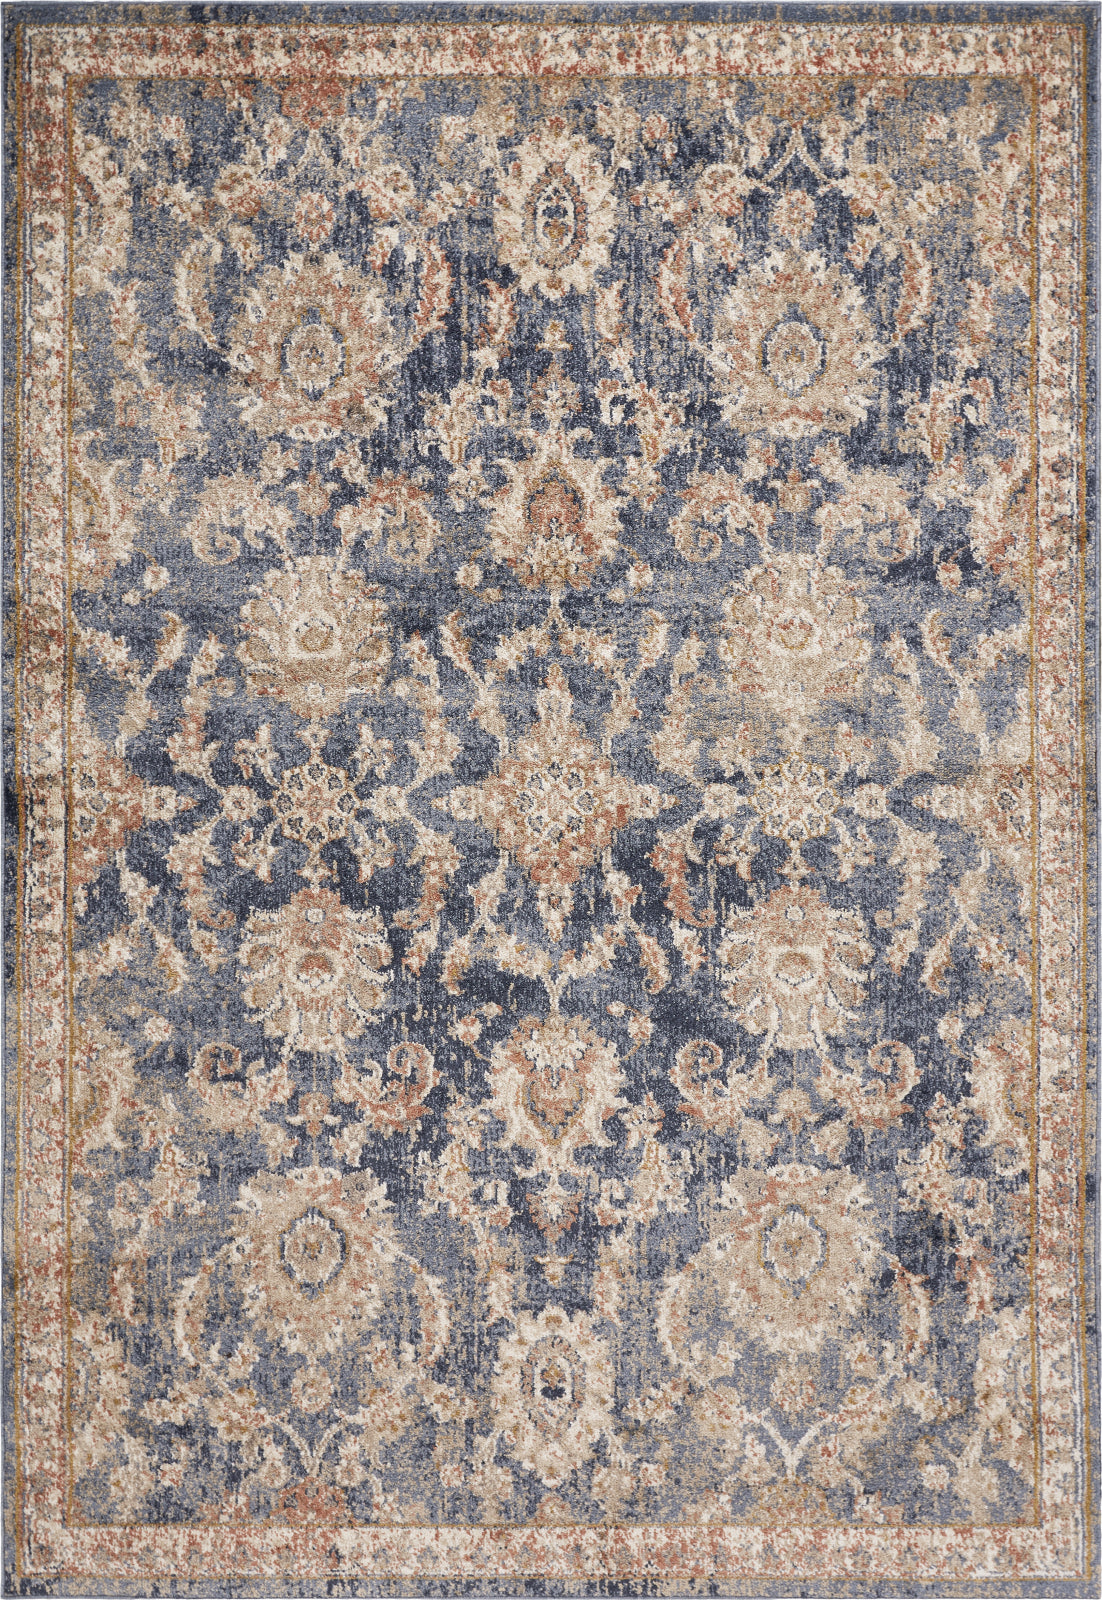 KAS Manor 6353 Demin Chester Area Rug main image